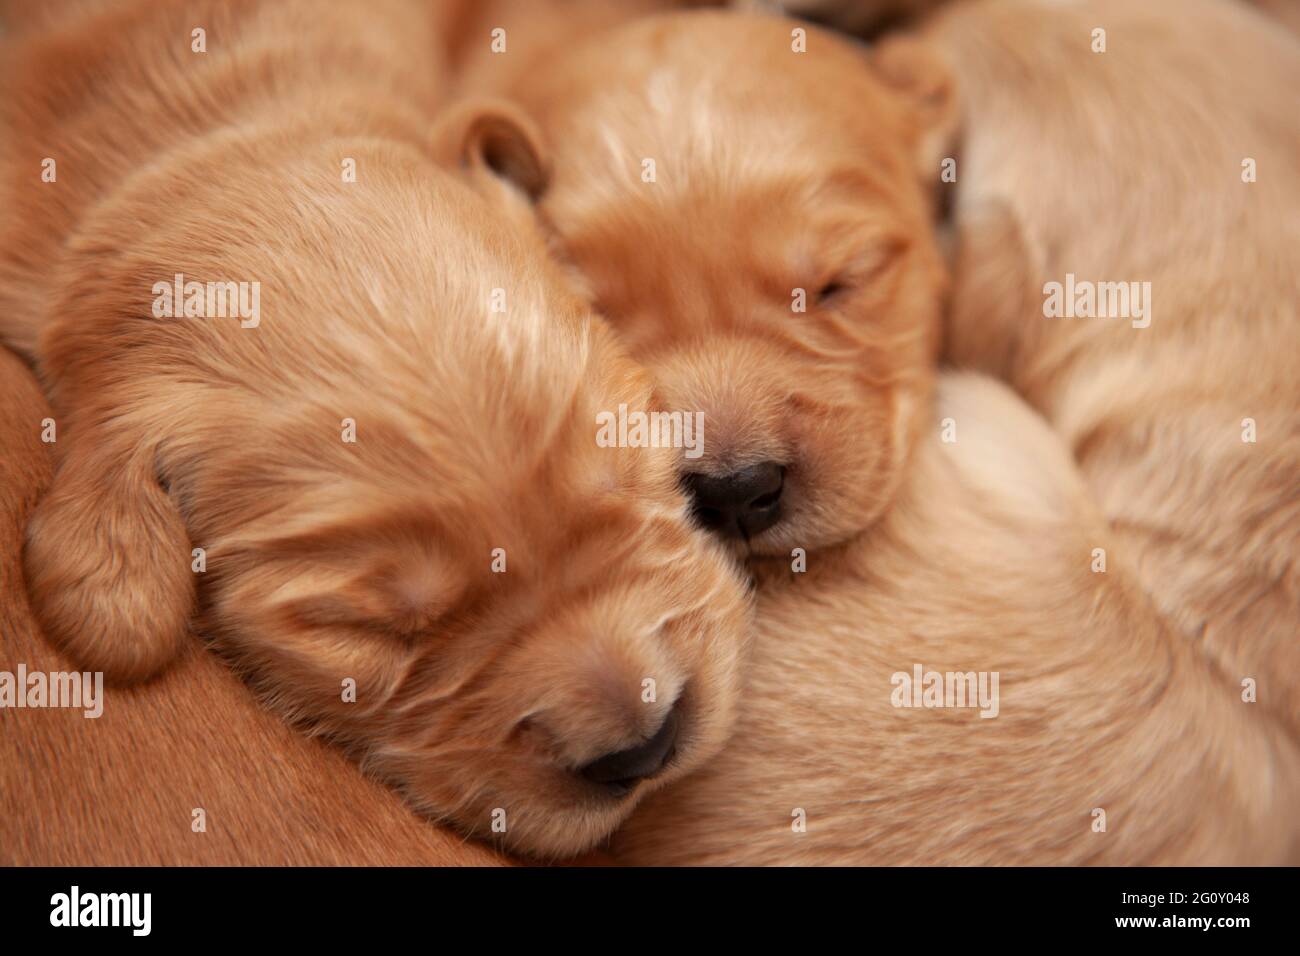 tiny week old sleeping puppies snooze and snuggle together with beautiful golden fur Stock Photo